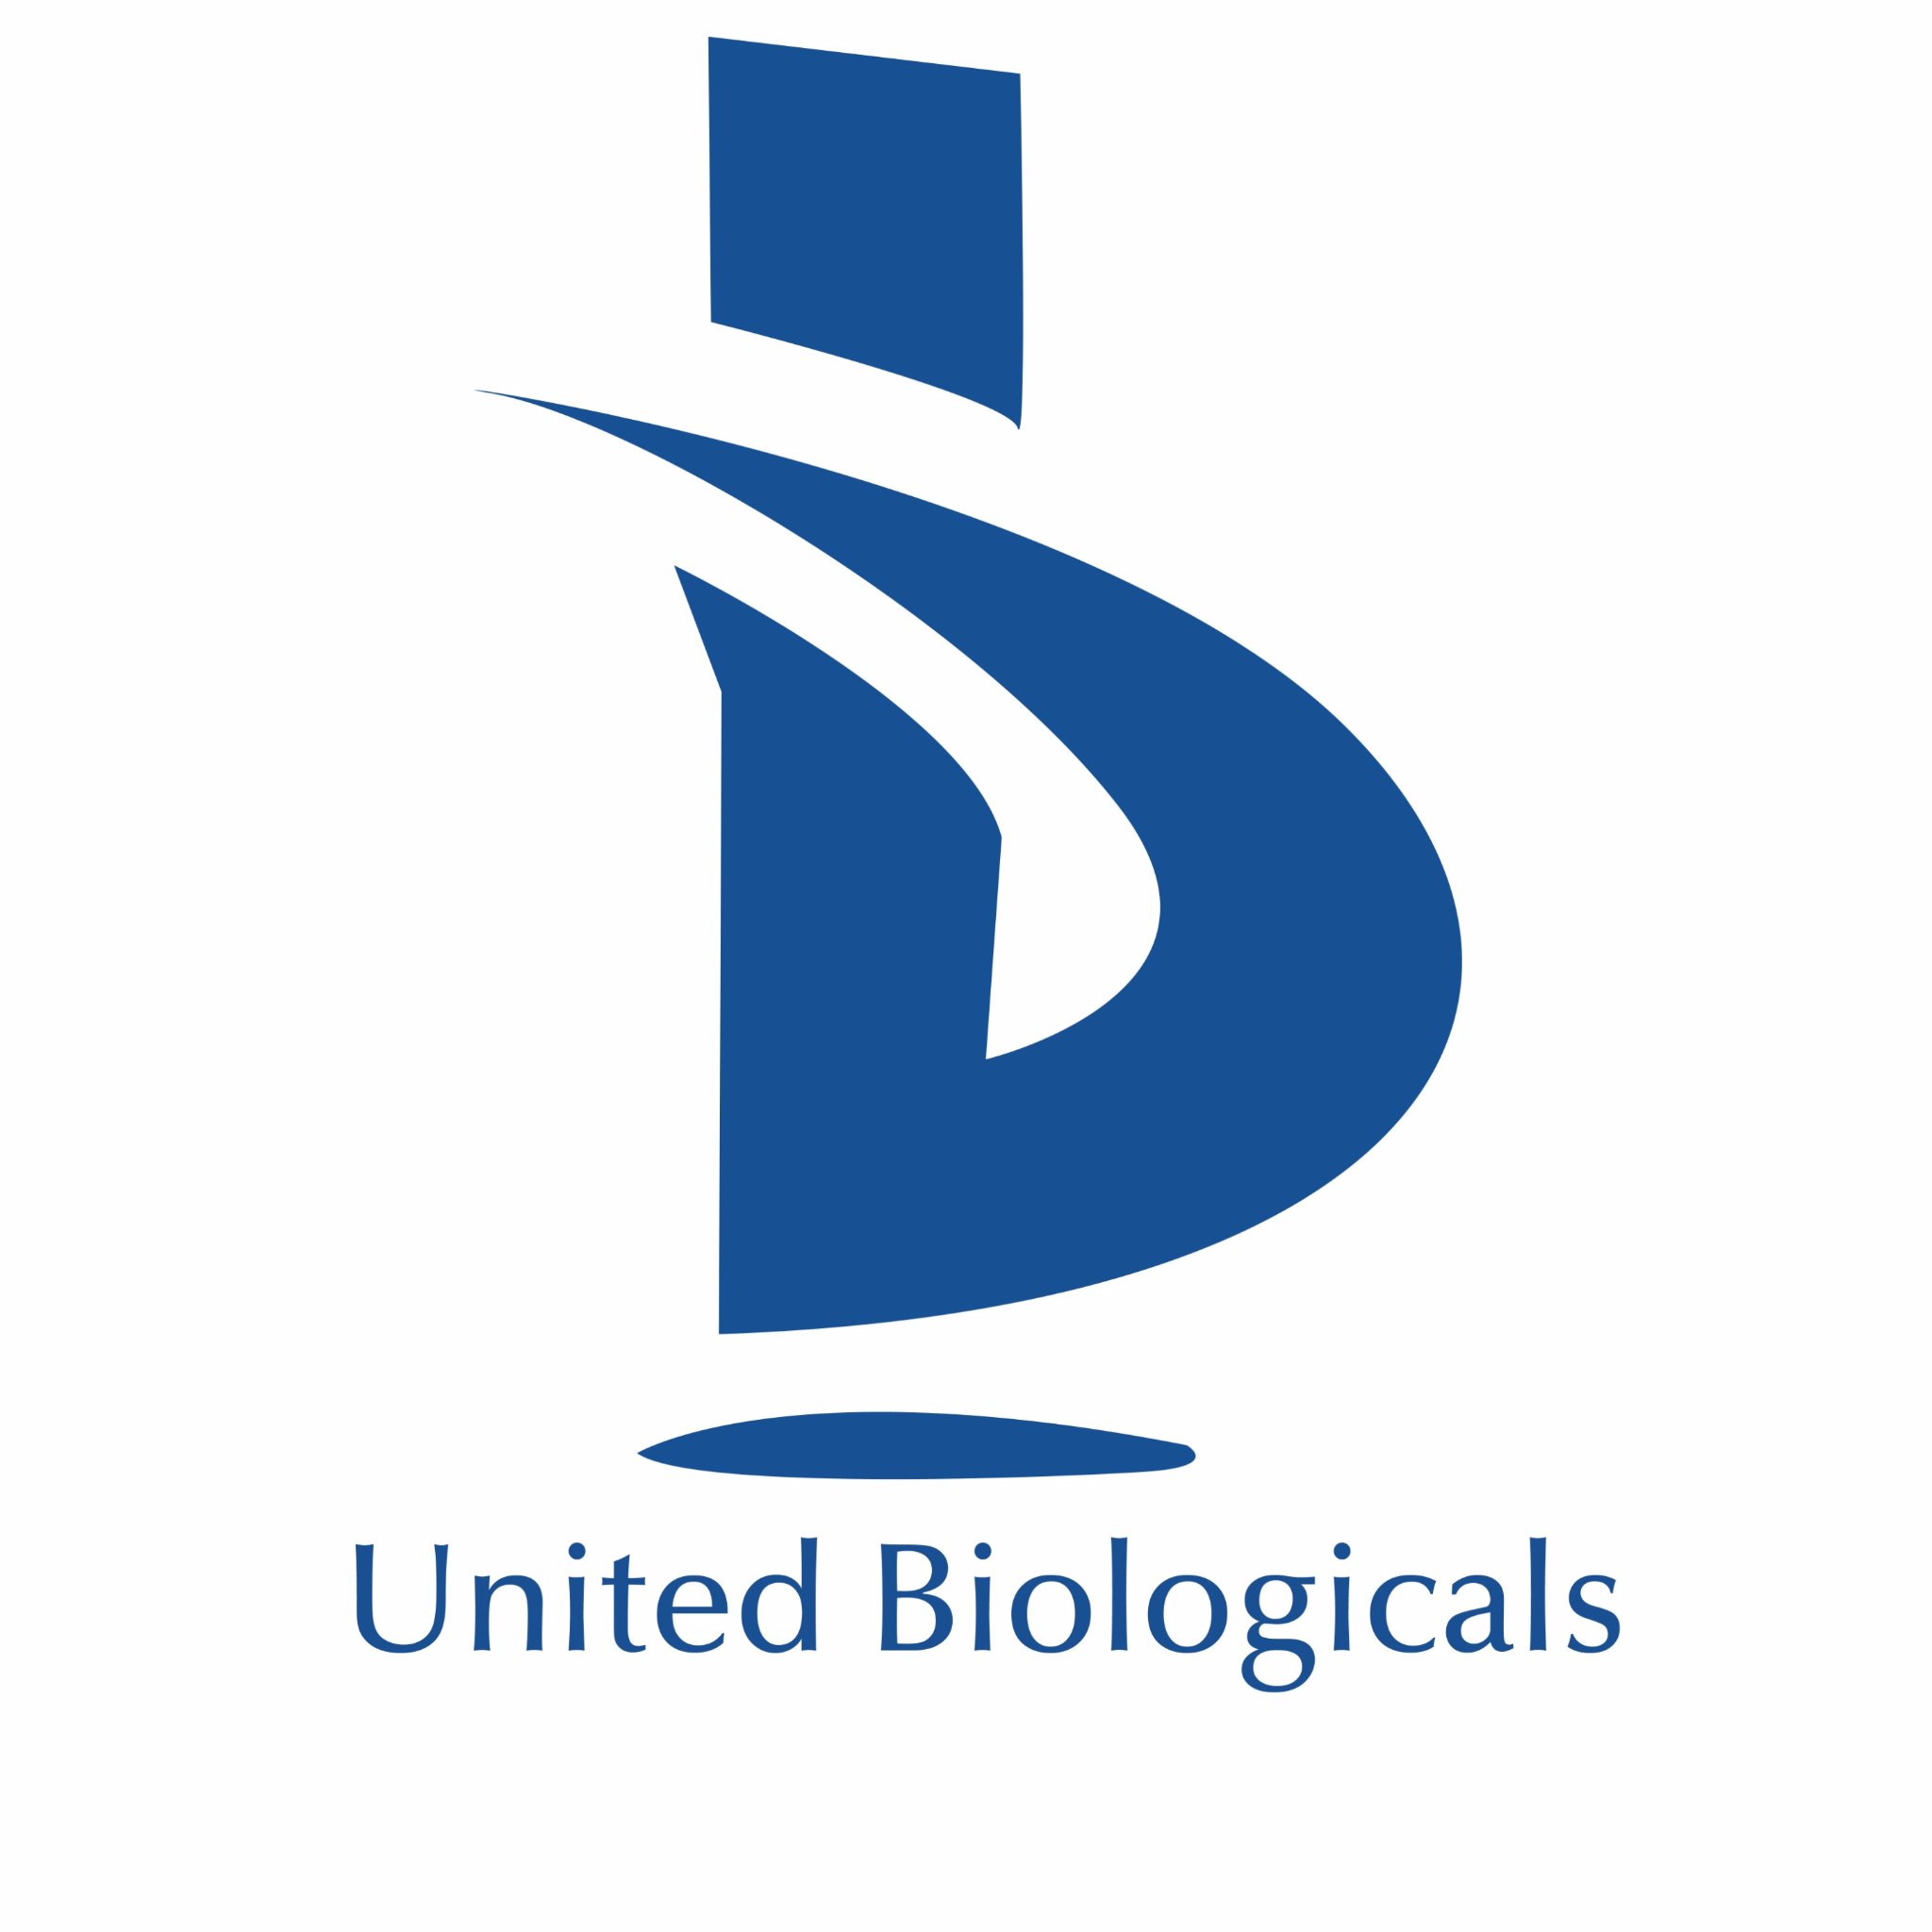 United Biologicals Hyderabad's one have the leading & Largest Distribution Company for laboratory Equipment’s in Telangana & Andhra Pradesh